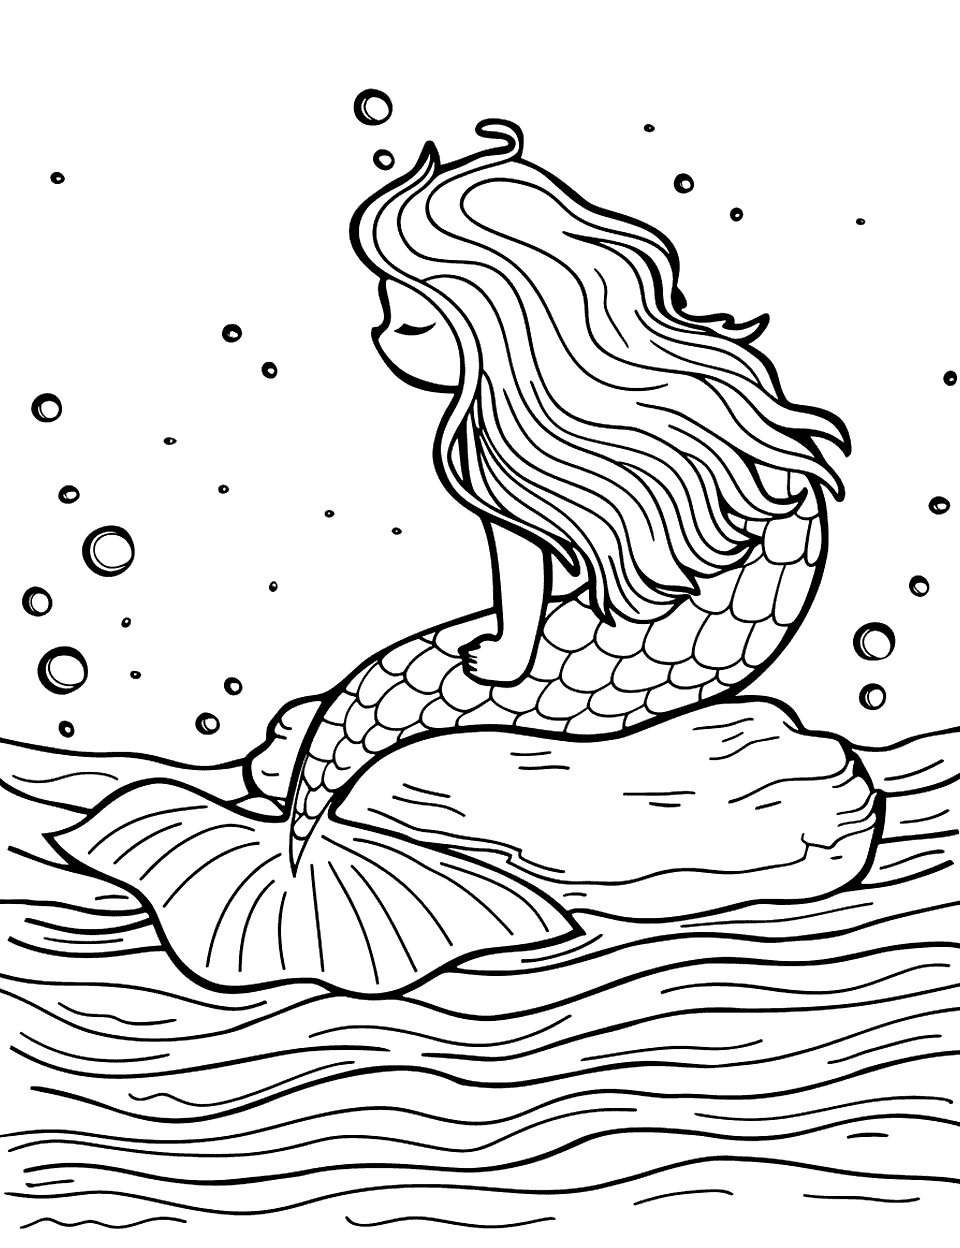 Mermaid Resting on a Rock Sea Creature Coloring Page - A mermaid sits peacefully on a rock, her tail curled up beside her, surrounded by gentle waves.